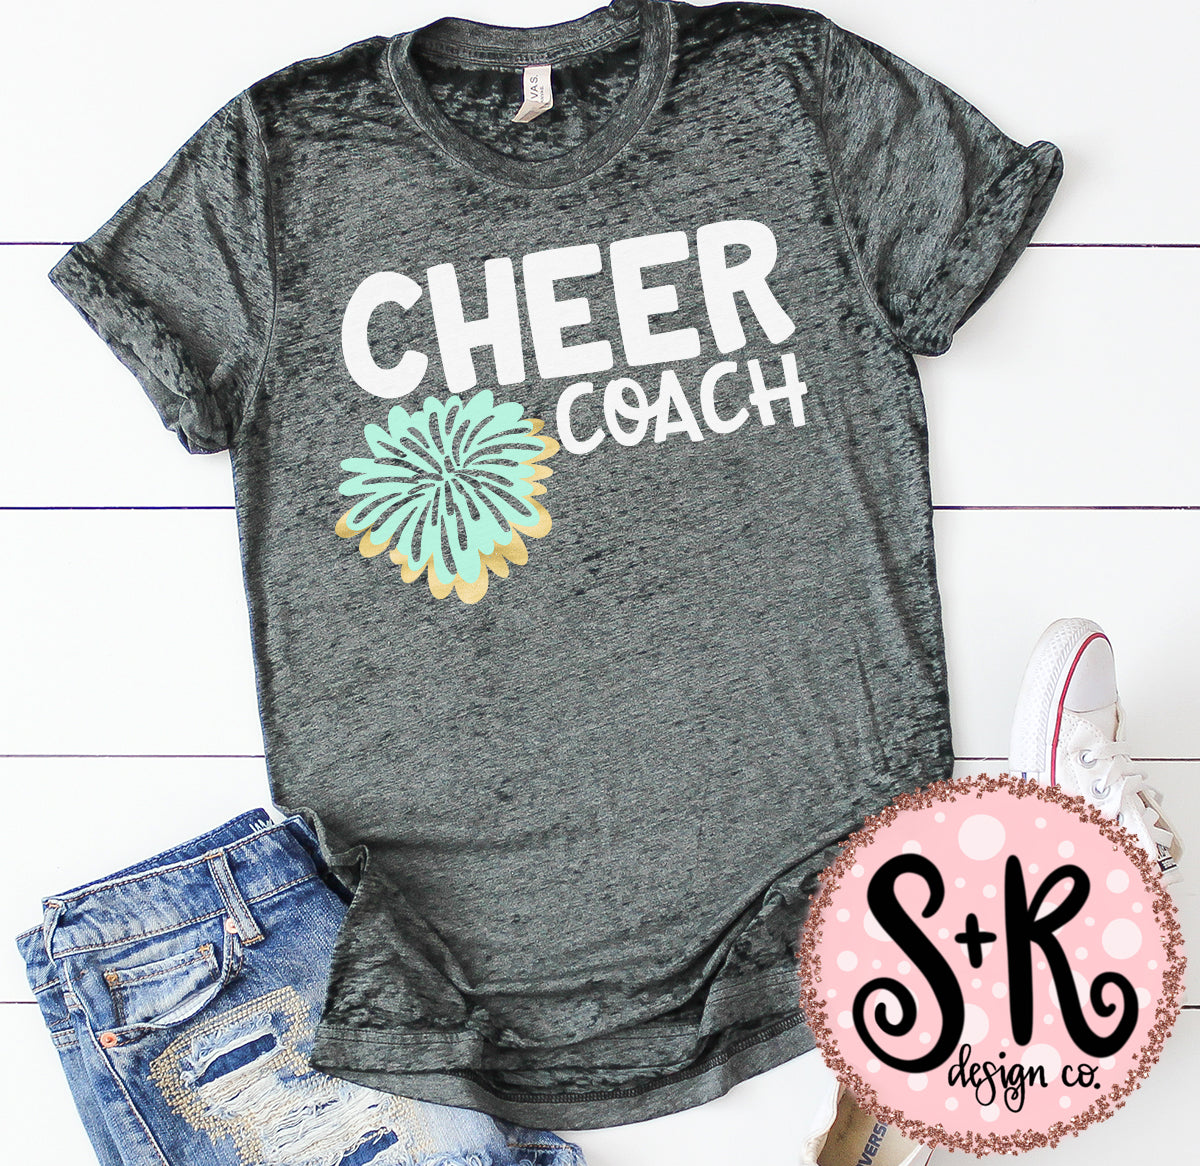 Cheer Coach Svg Dxf Png 2019 Scout And Rose Design Co